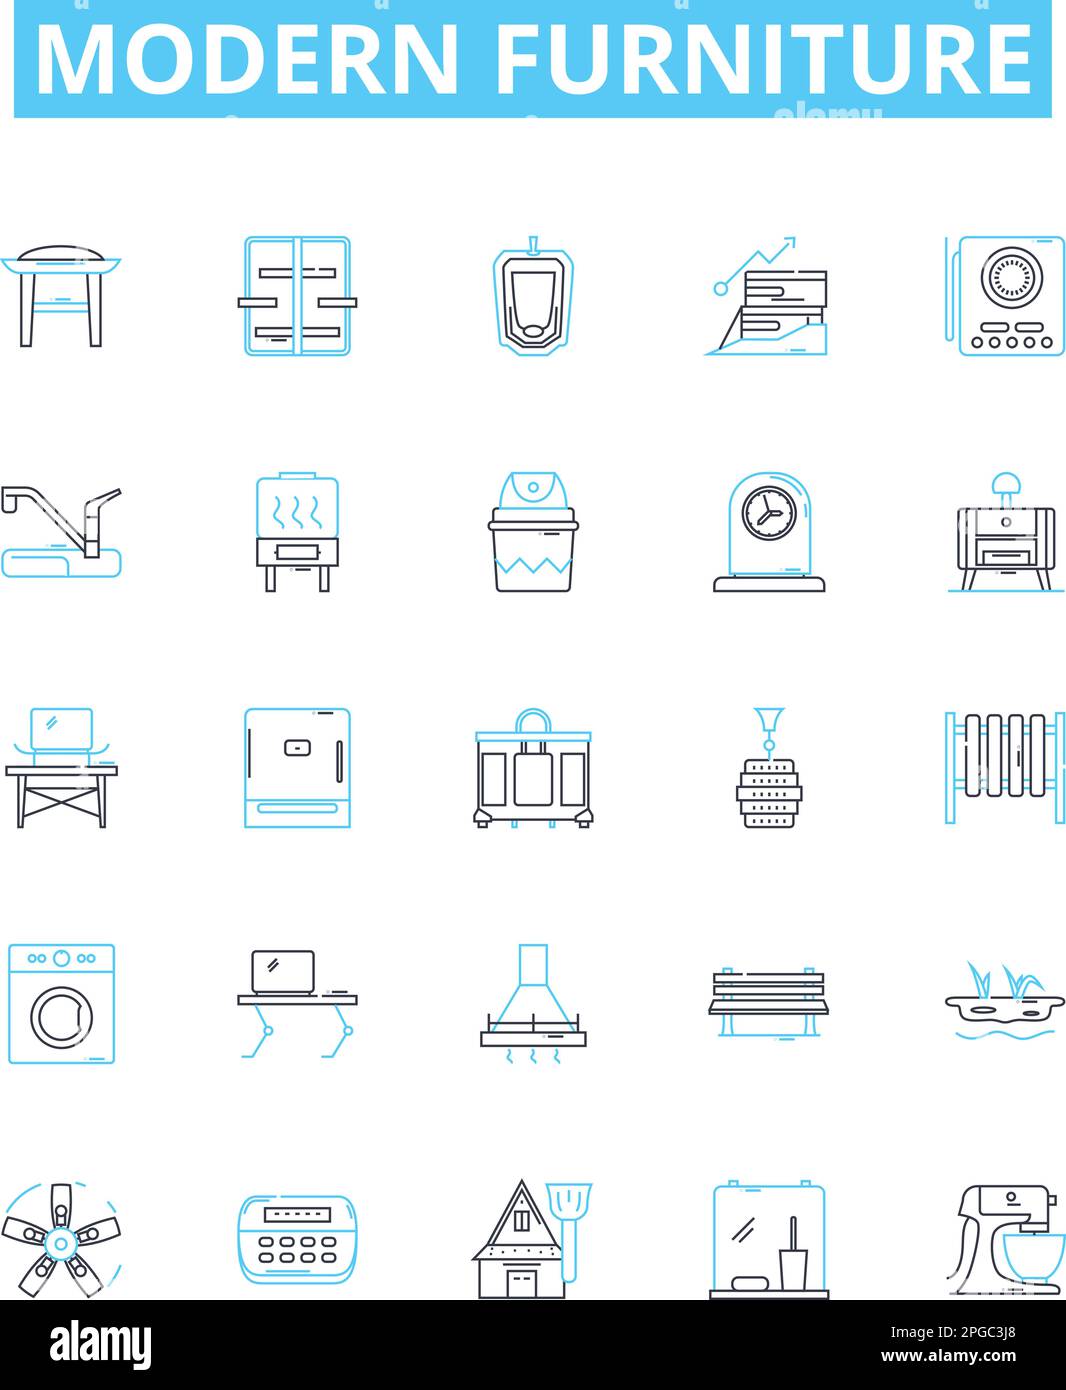 Modern furniture vector line icons set. contemporary, stylish, sleek, designer, functional, luxurious, updated illustration outline concept symbols Stock Vector